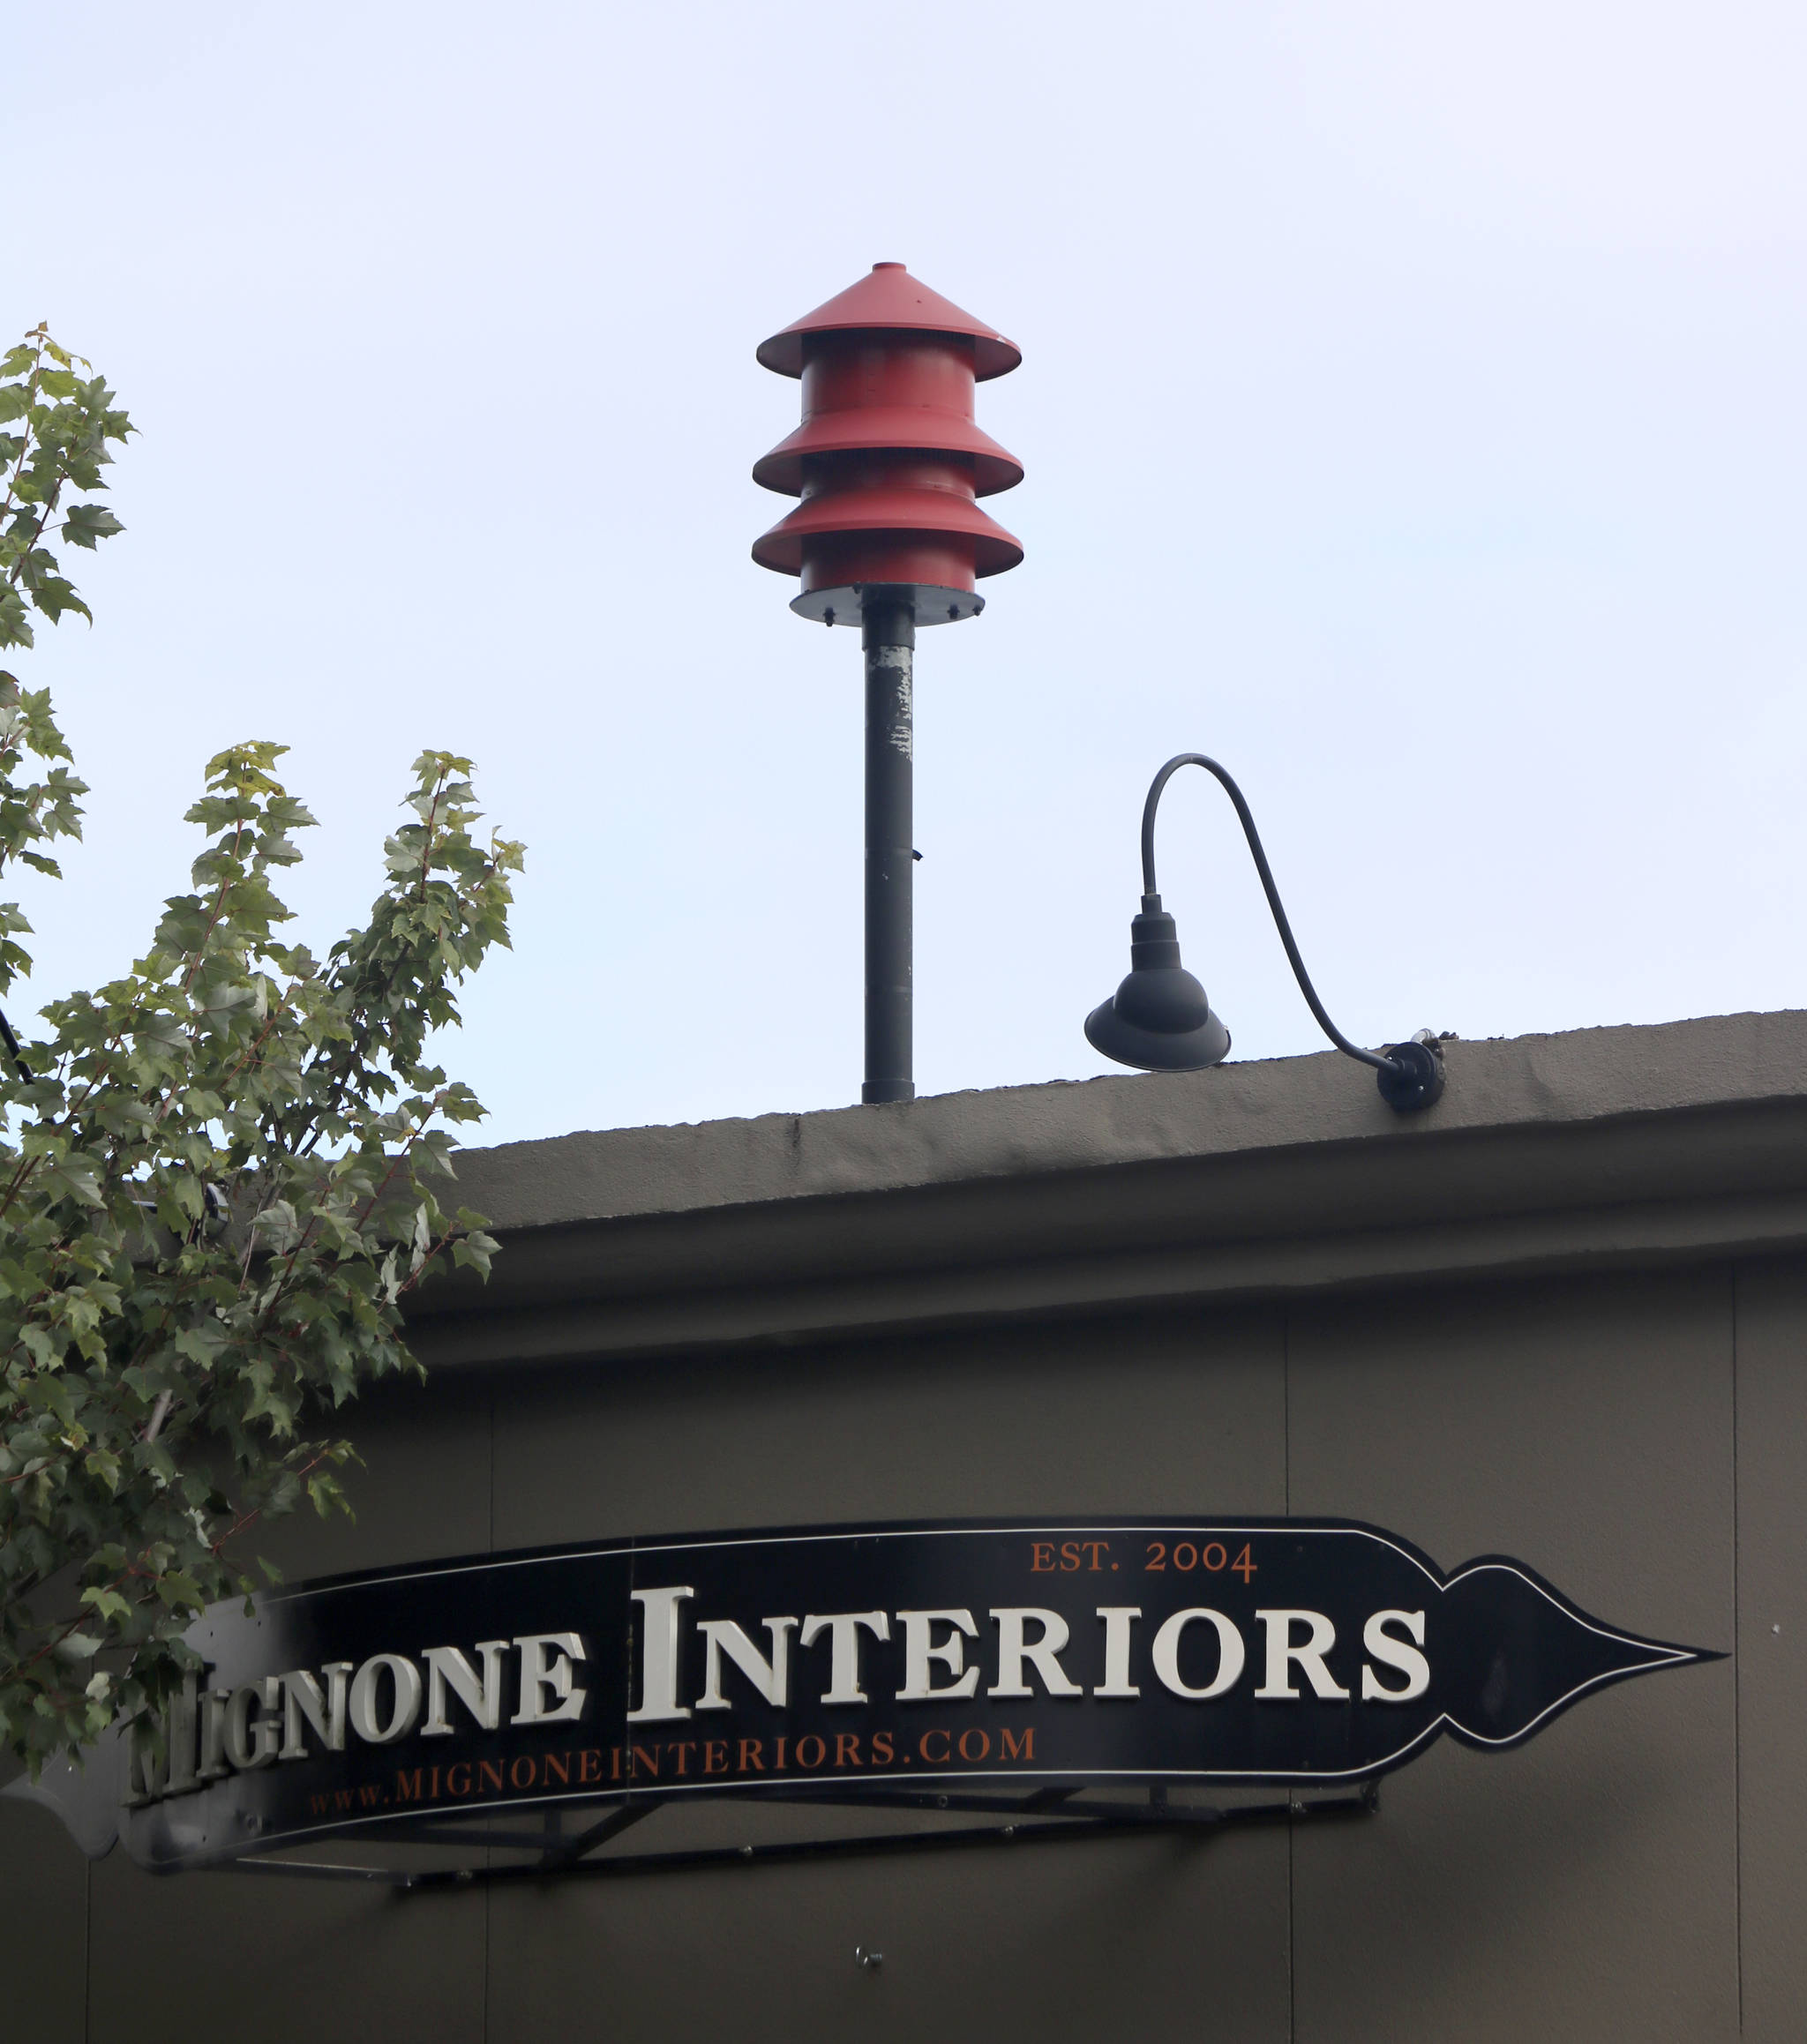 The Snoqualmie siren has been repaired by Russell Wentz and restored to its position on the Mignone Interiors building in downtown Snoqualmie. She siren sounds at noon, Monday through Saturday. (Evan Pappas/Staff Photo)